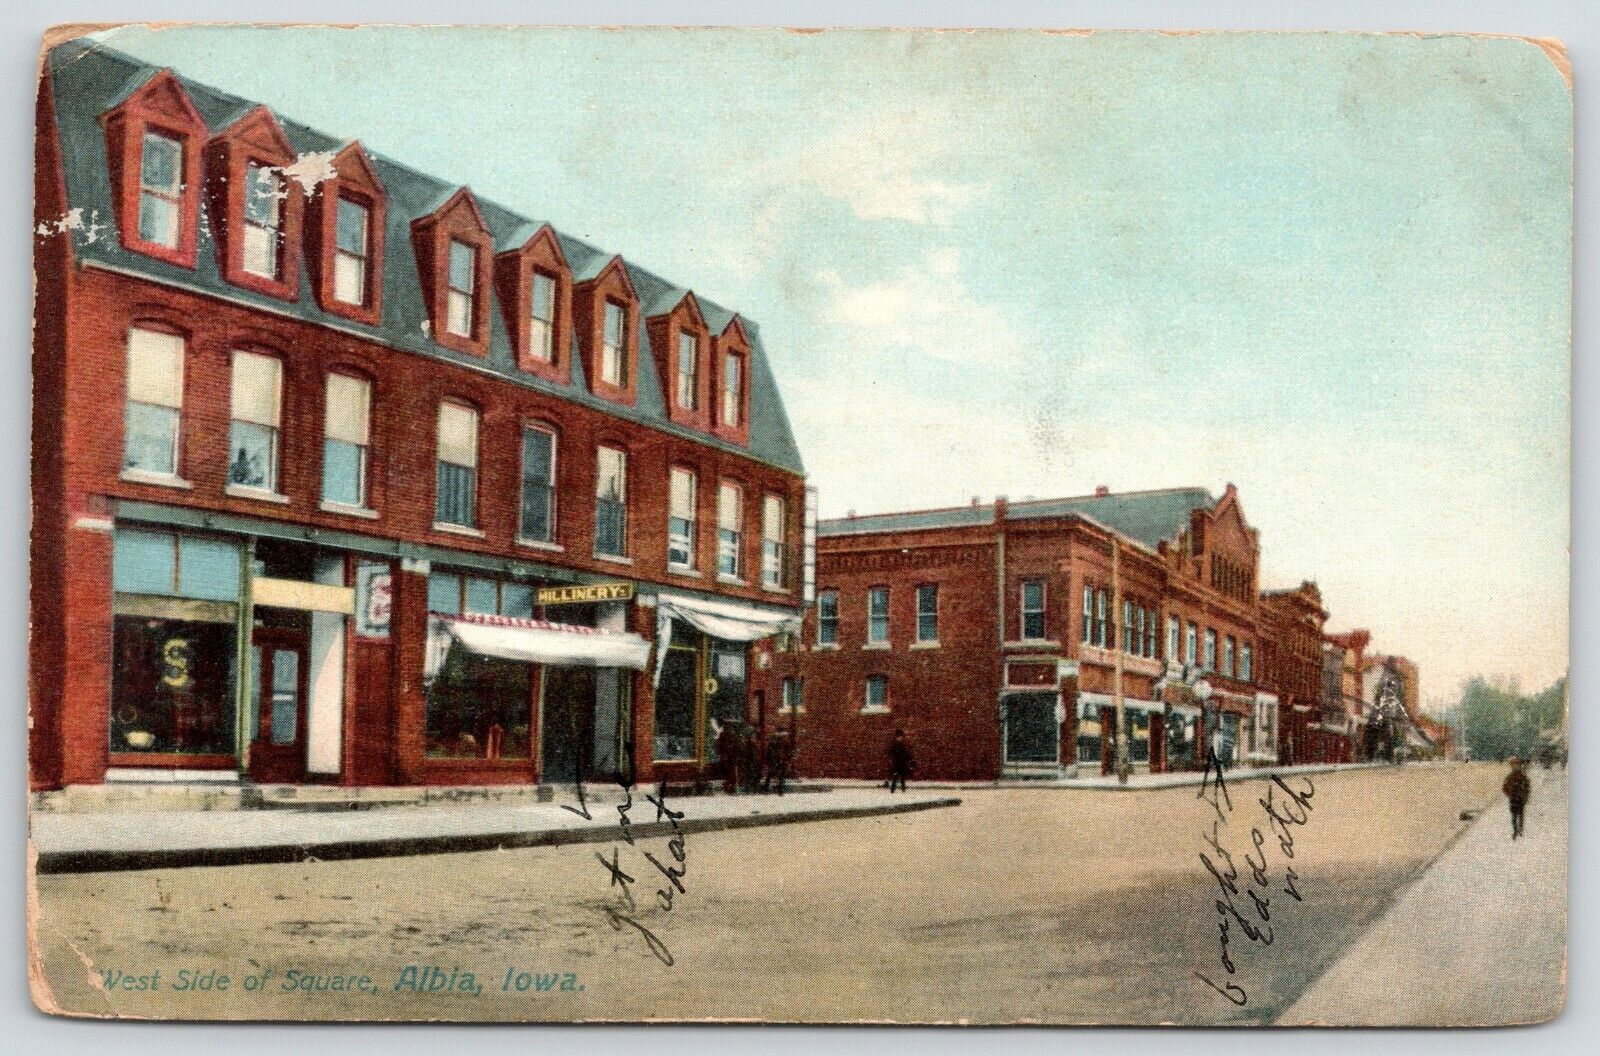 Albia Iowa~West Side Square~Millinery Shop: Got Me a Hat~Jewelry Store~c1910